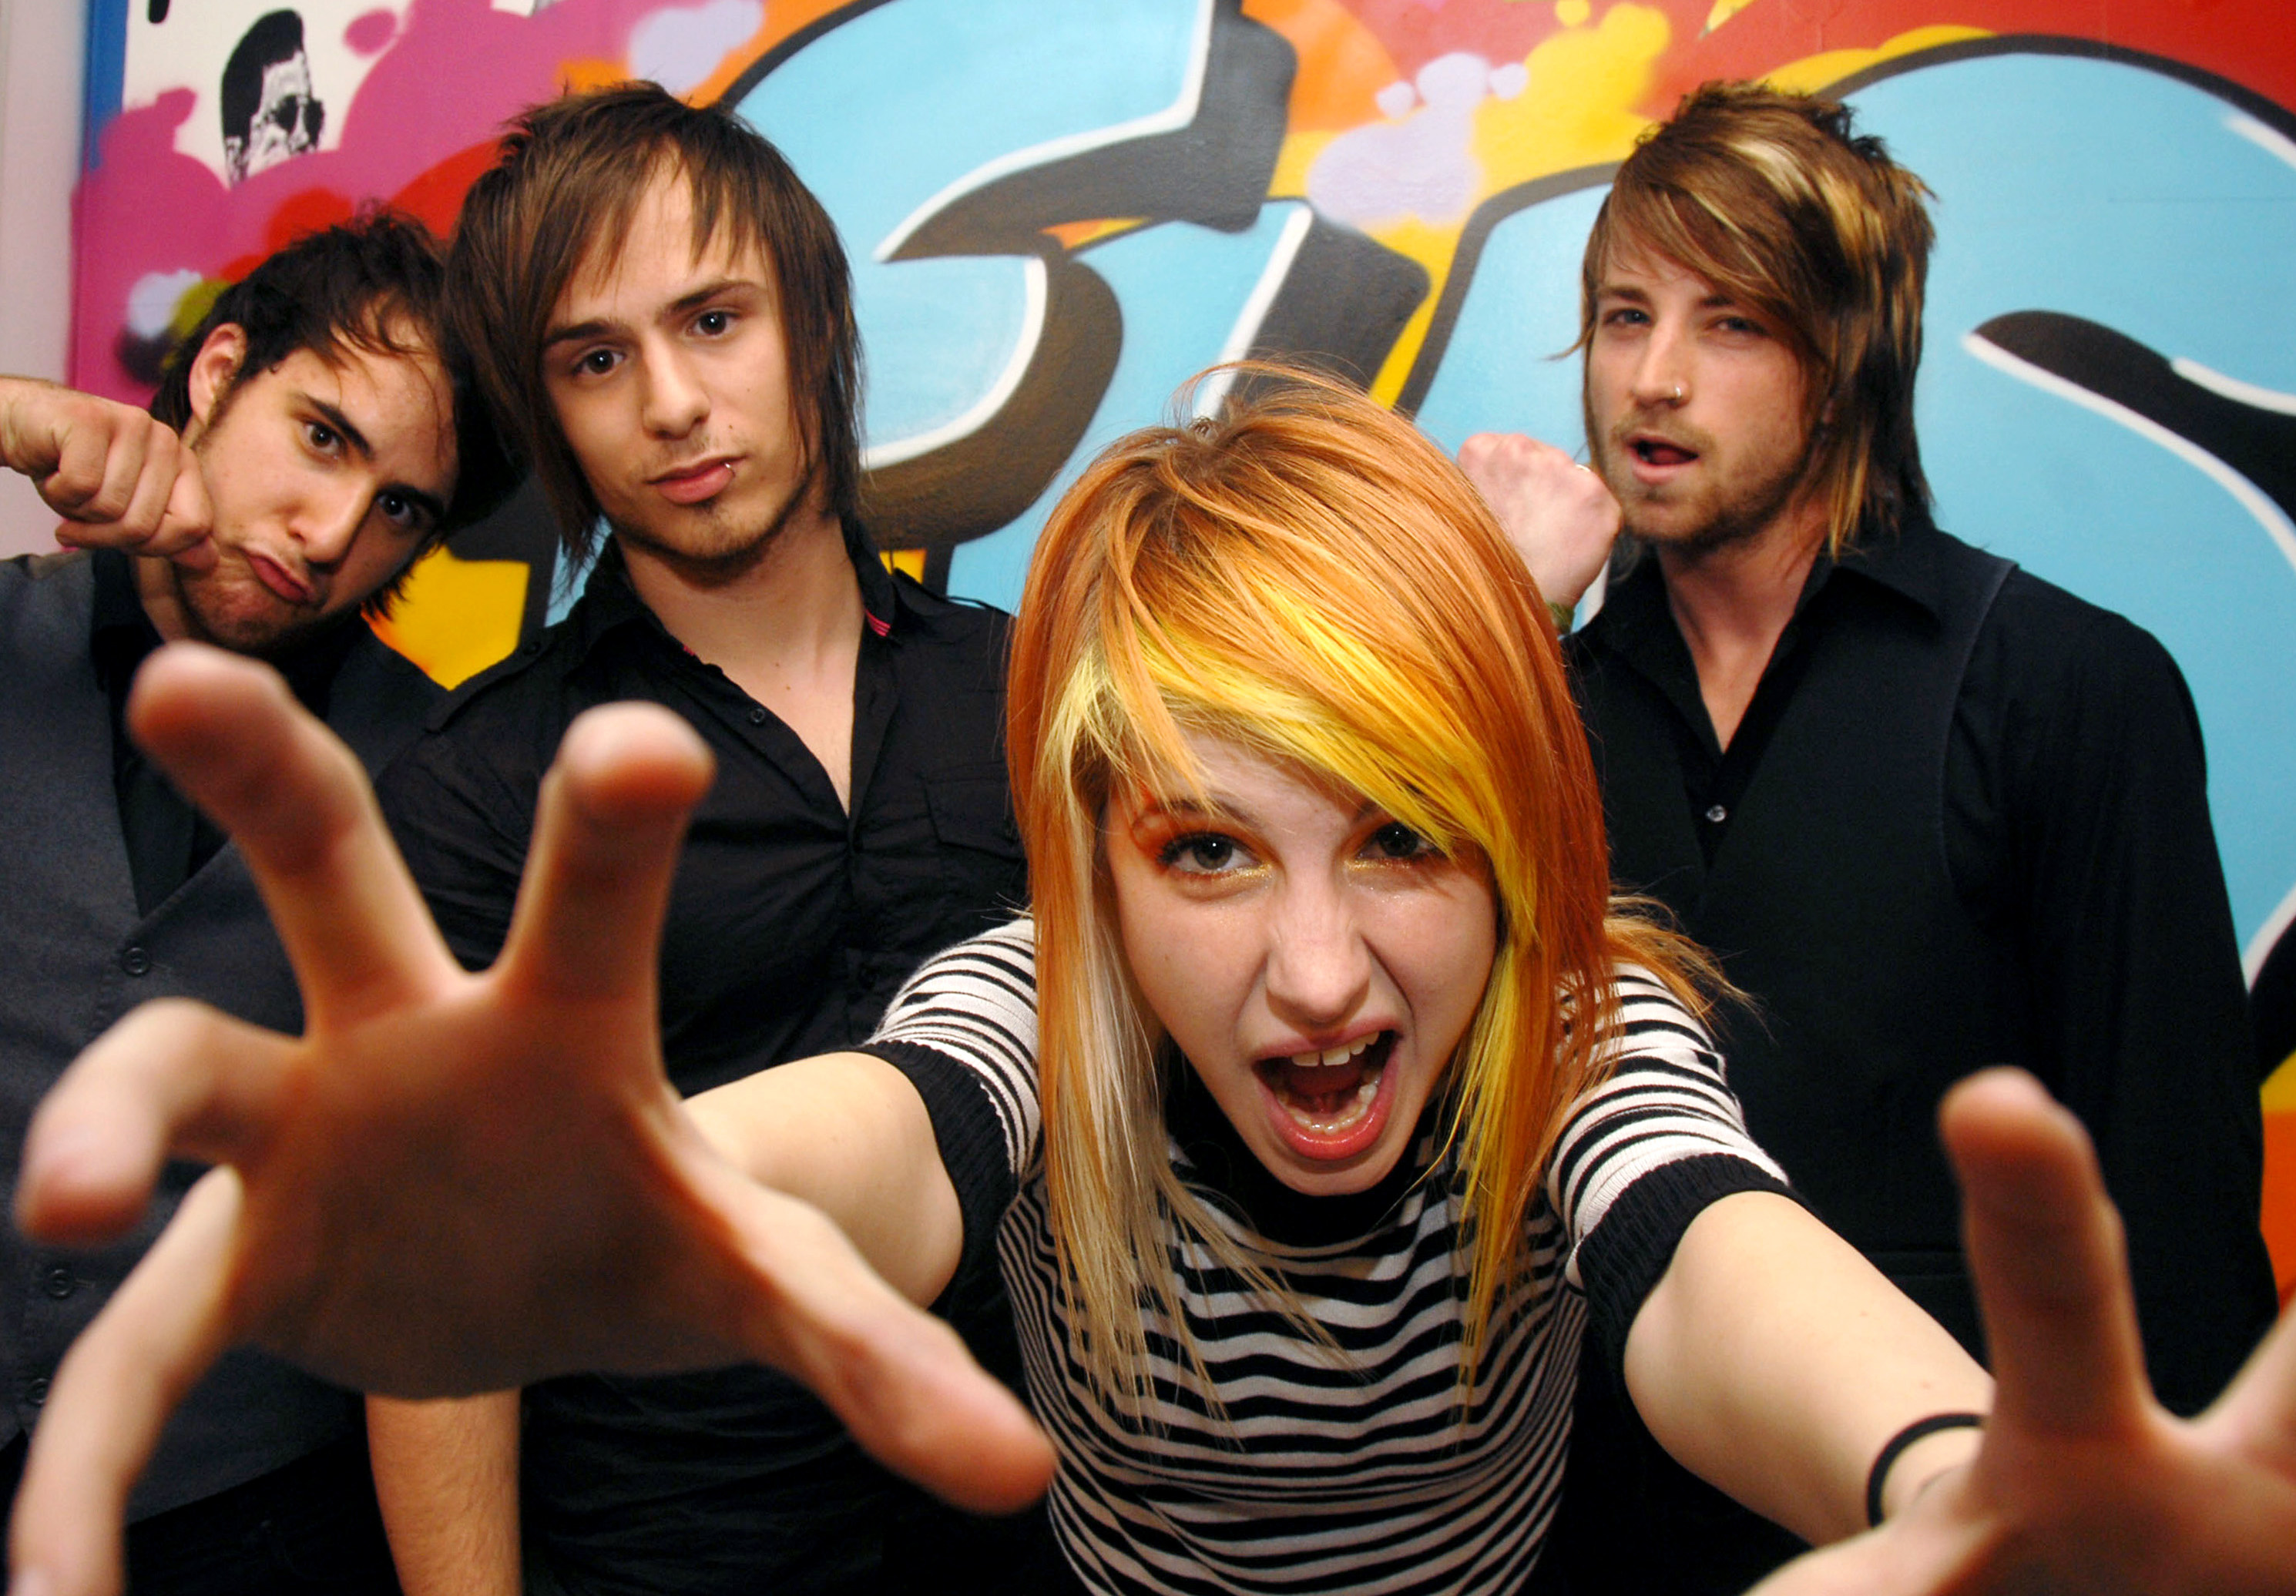 Paramore: The rock band, Lead vocalist Hayley Williams, guitarist Taylor York and drummer Zac Farro. 2980x2080 HD Background.